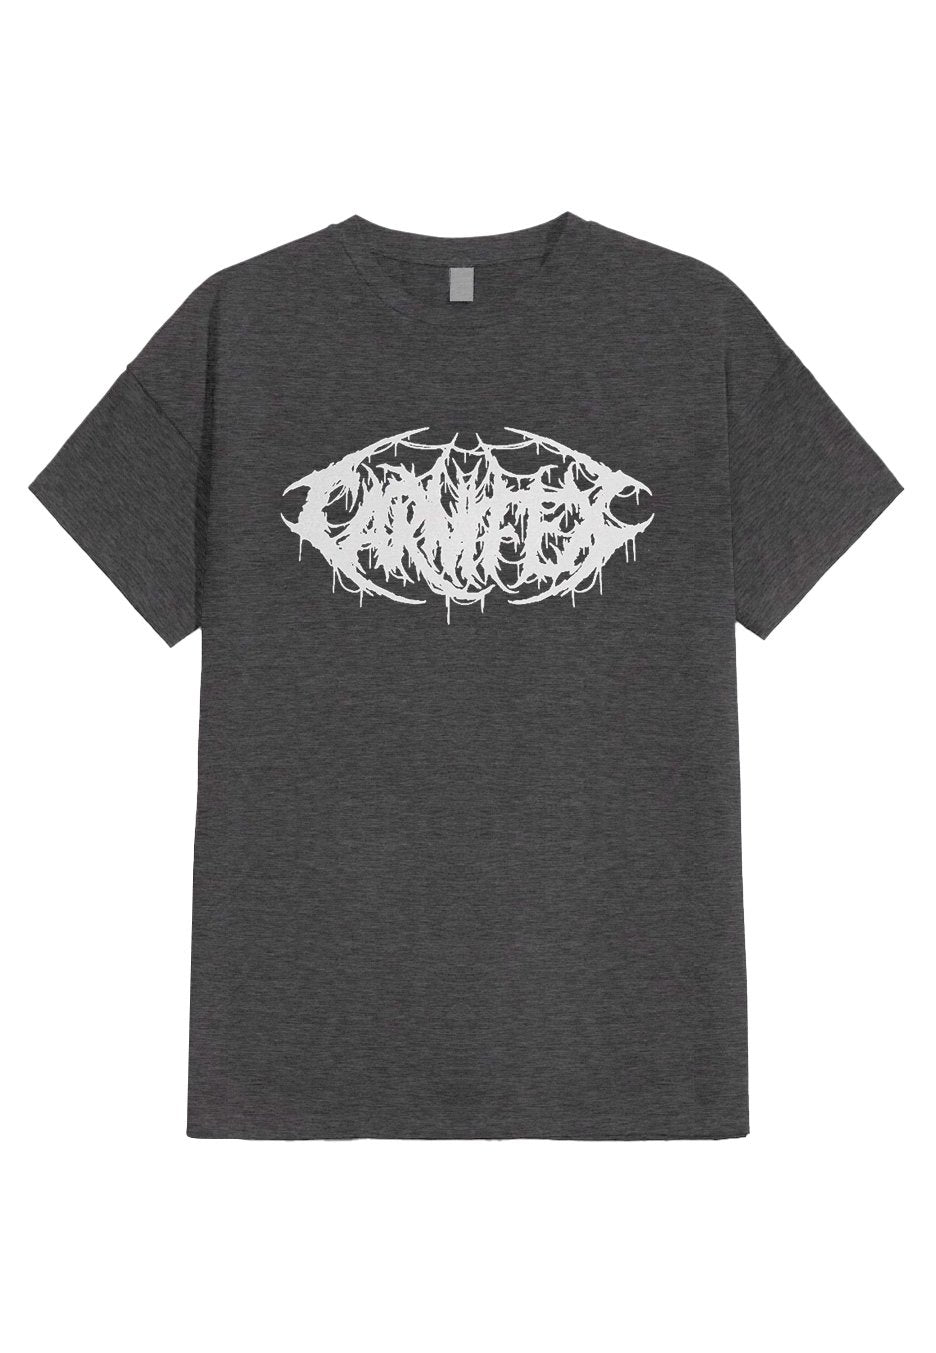 Carnifex - Rest In Pain Graphite Heather - T-Shirt | Neutral-Image